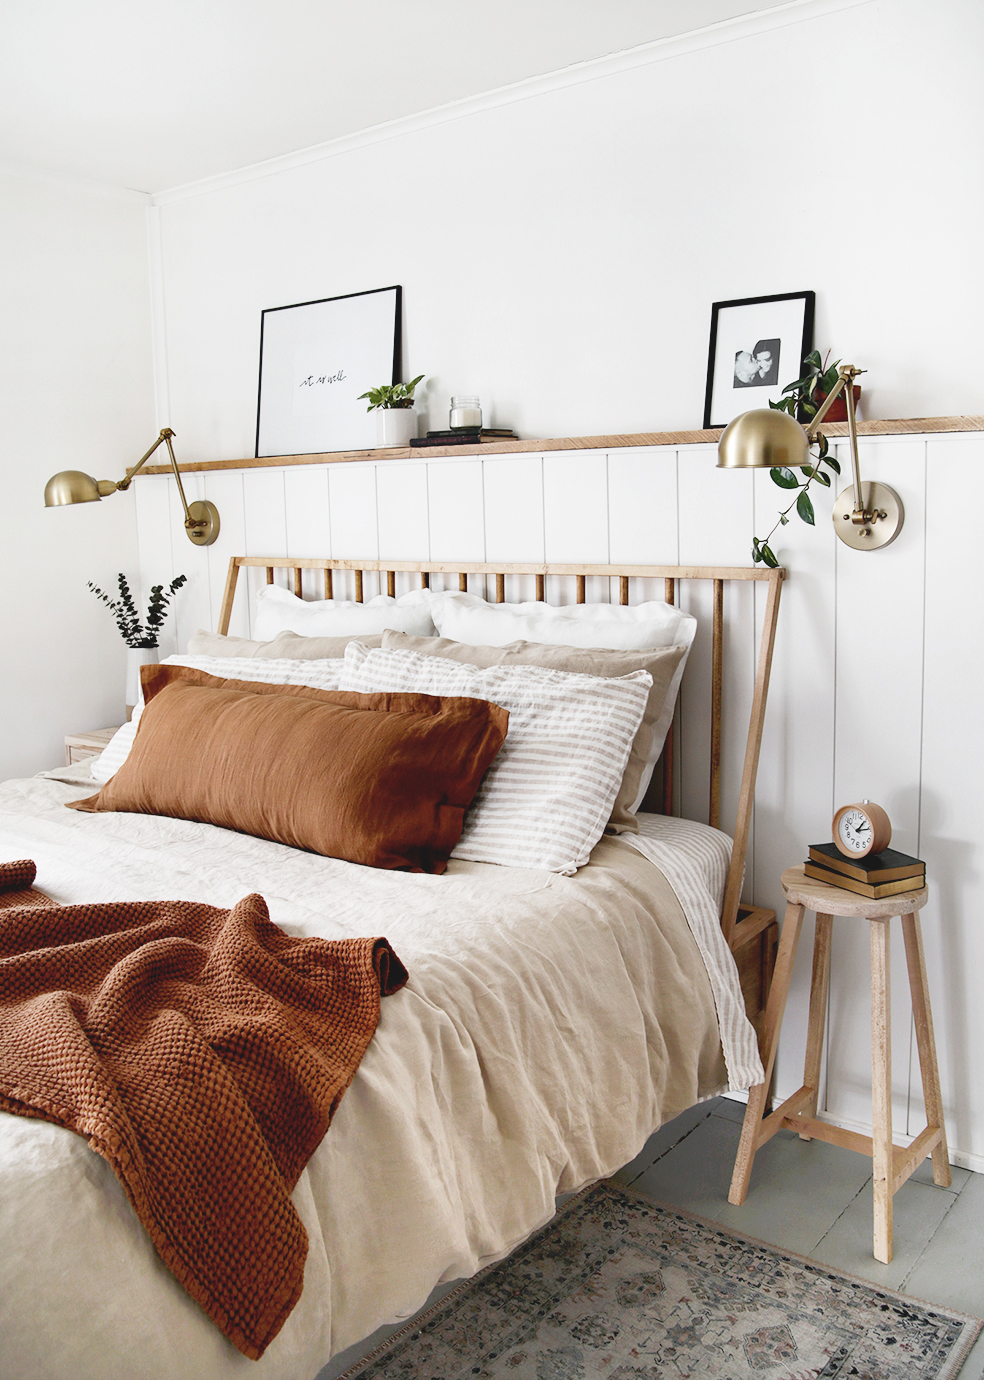 Diy Wood Dowel Headboard Learn How To, How To Make A Simple Headboard For Bed